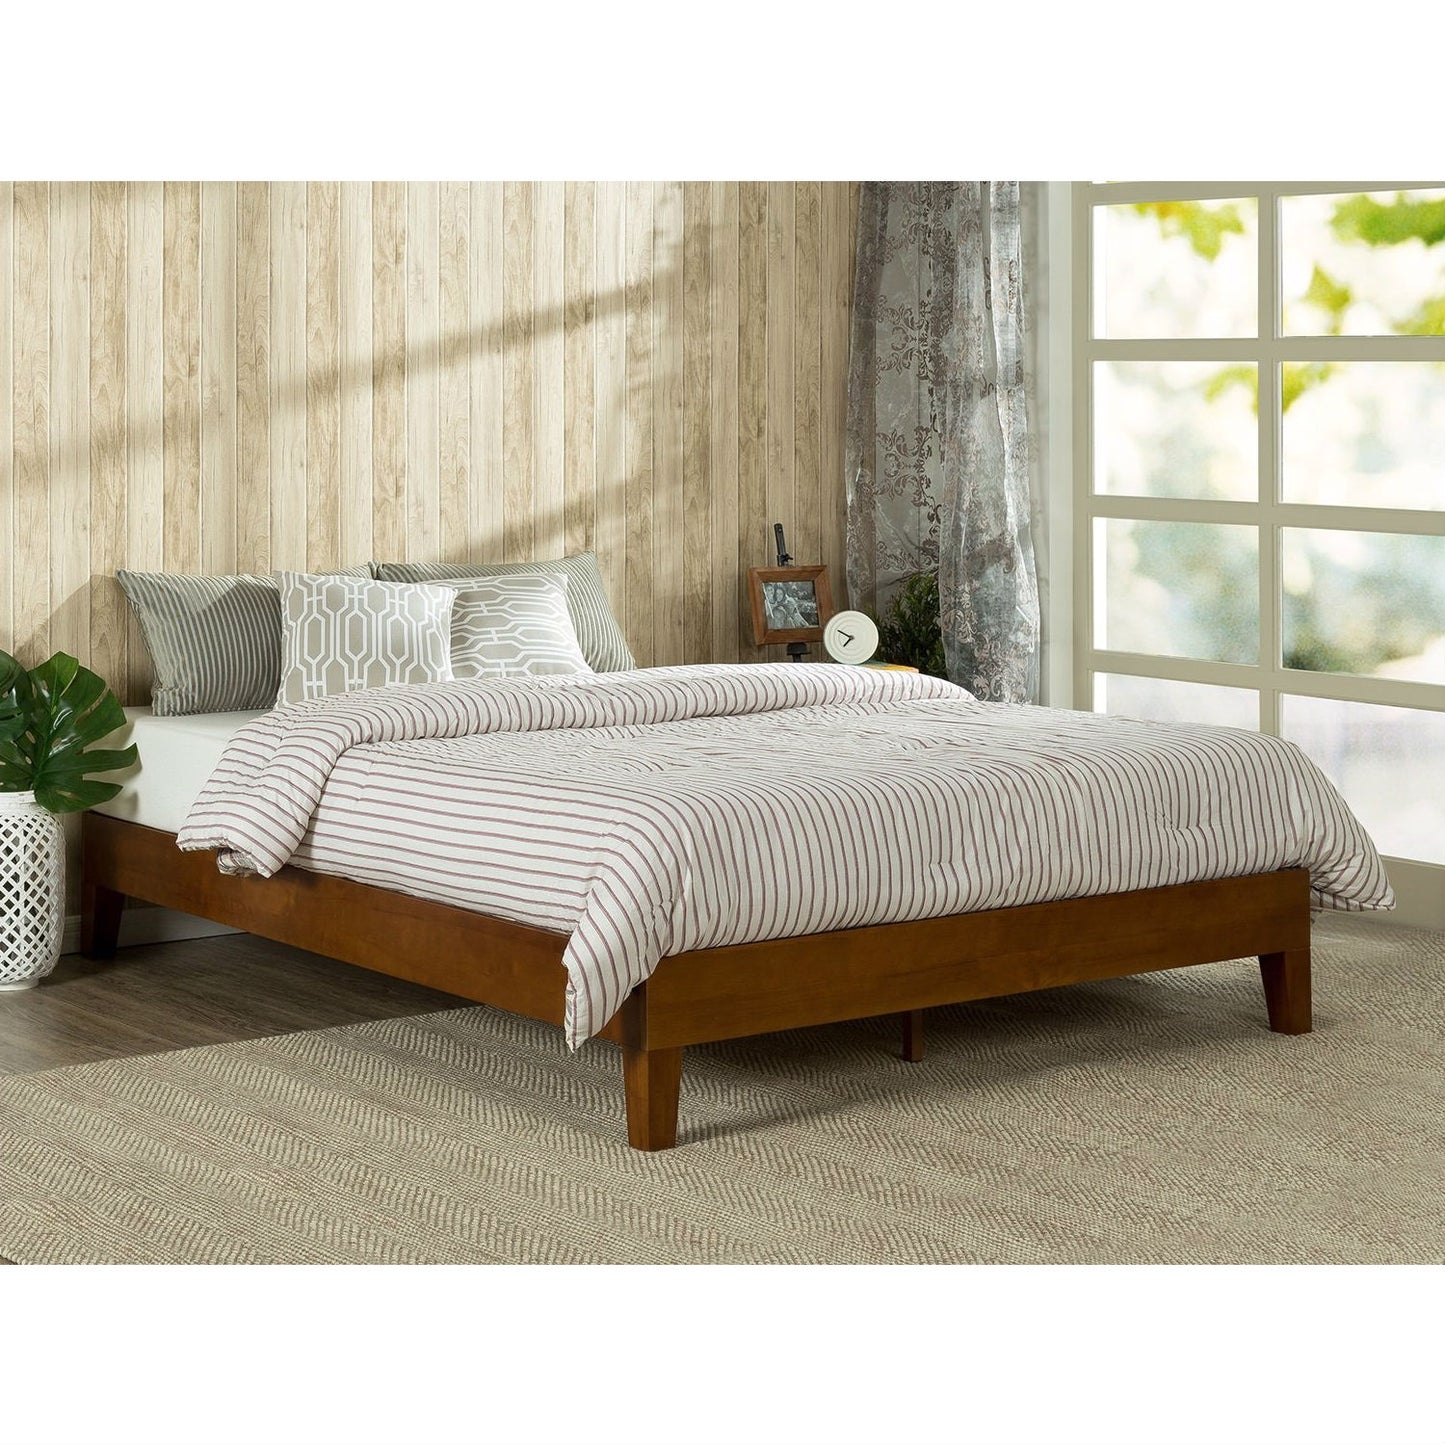 King size Modern Low Profile Solid Wood Platform Bed Frame in Cherry Finish